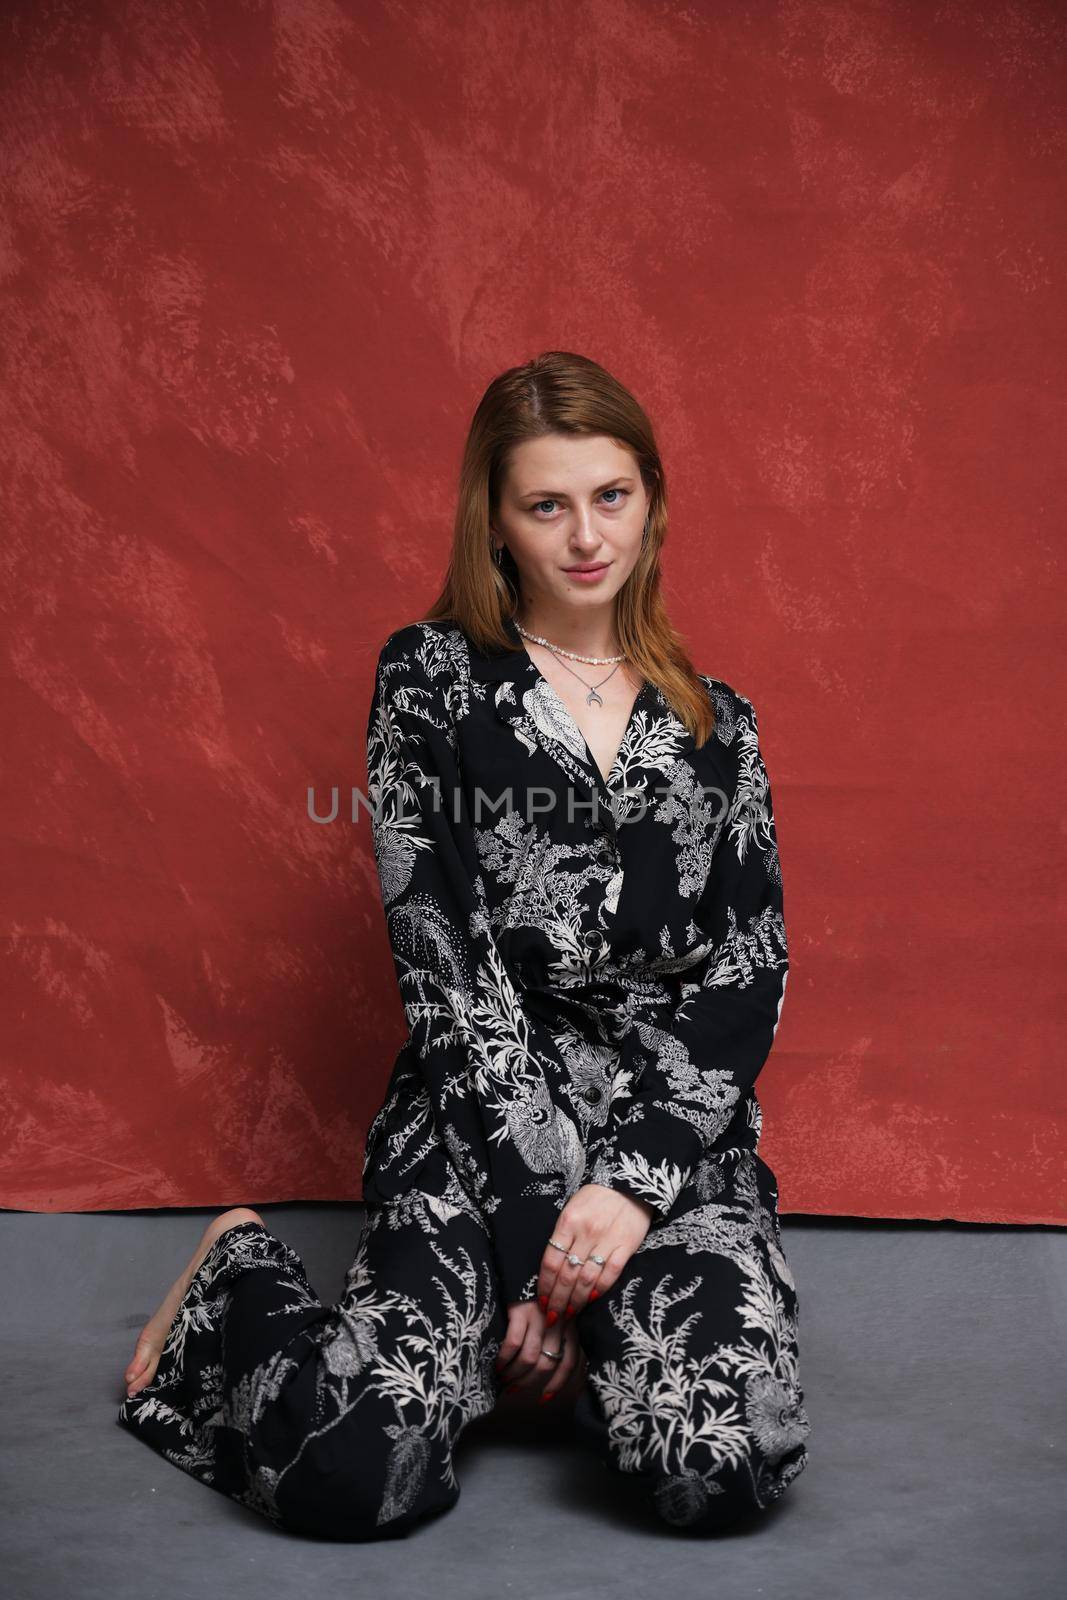 woman in dark clothes sits on the floor on a dark burgundy background